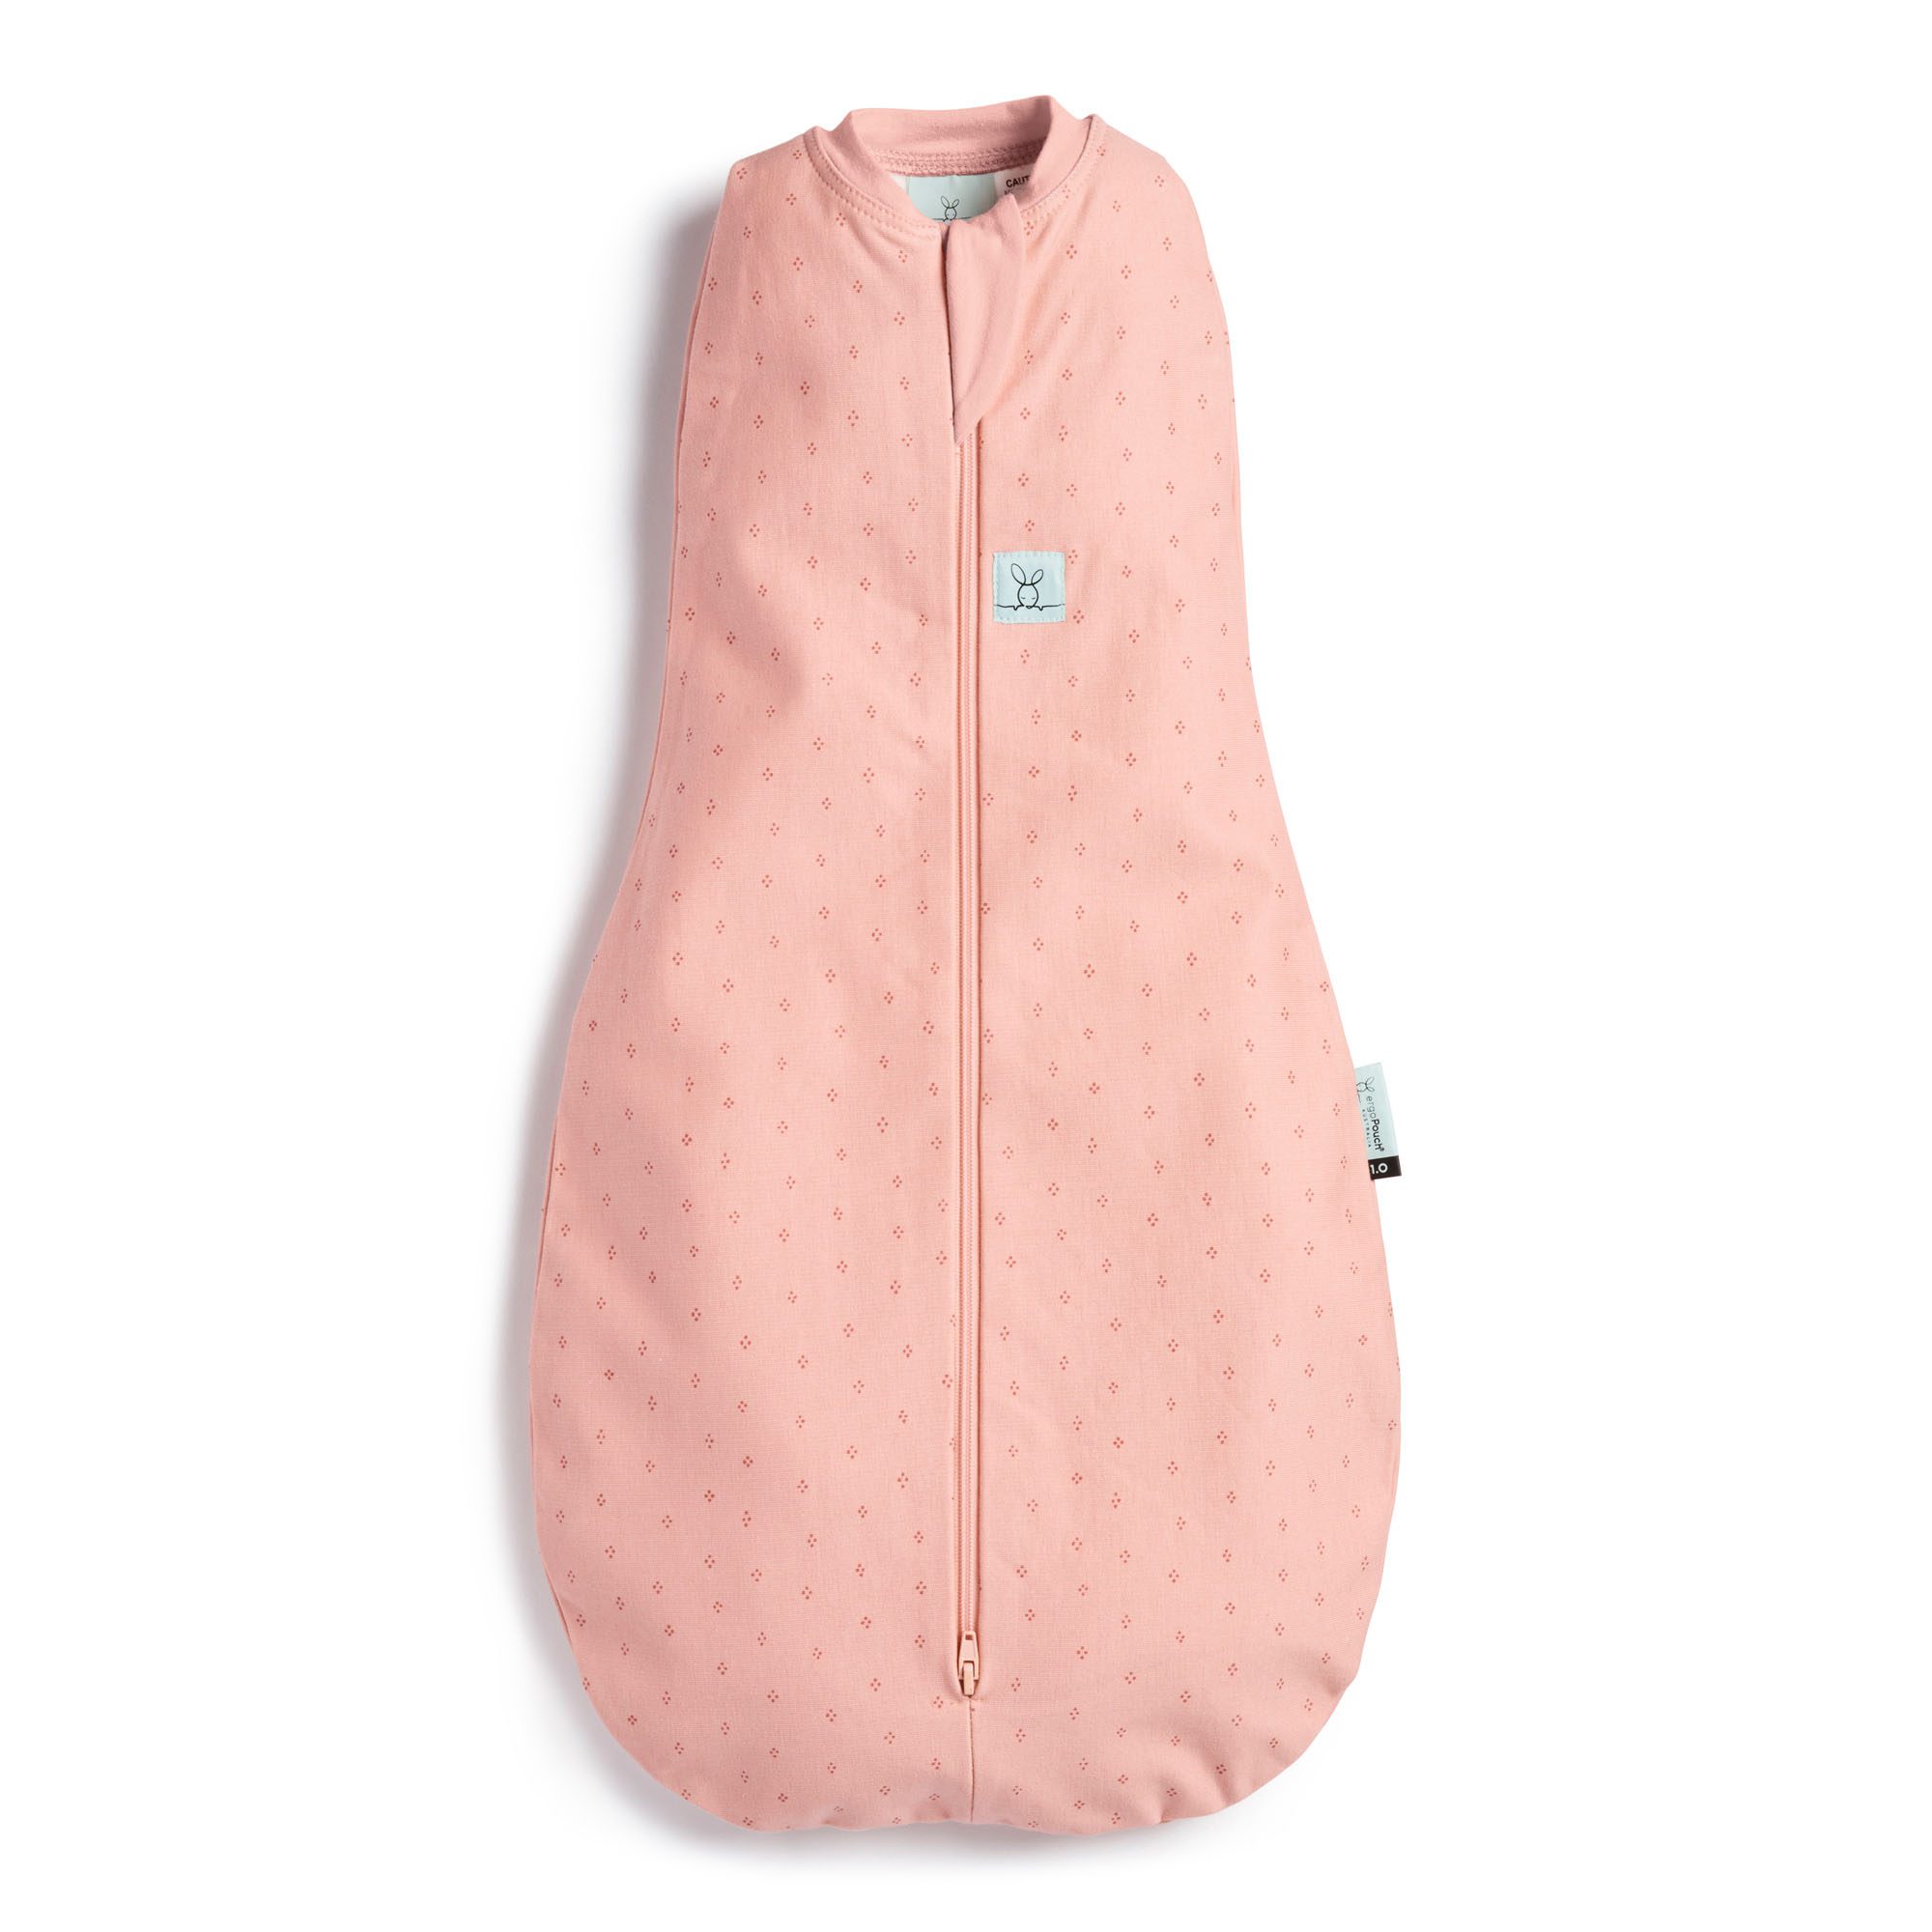 Baby Sleep Knitted Sleeping Bag Swaddle Shower Gift for Cocoon